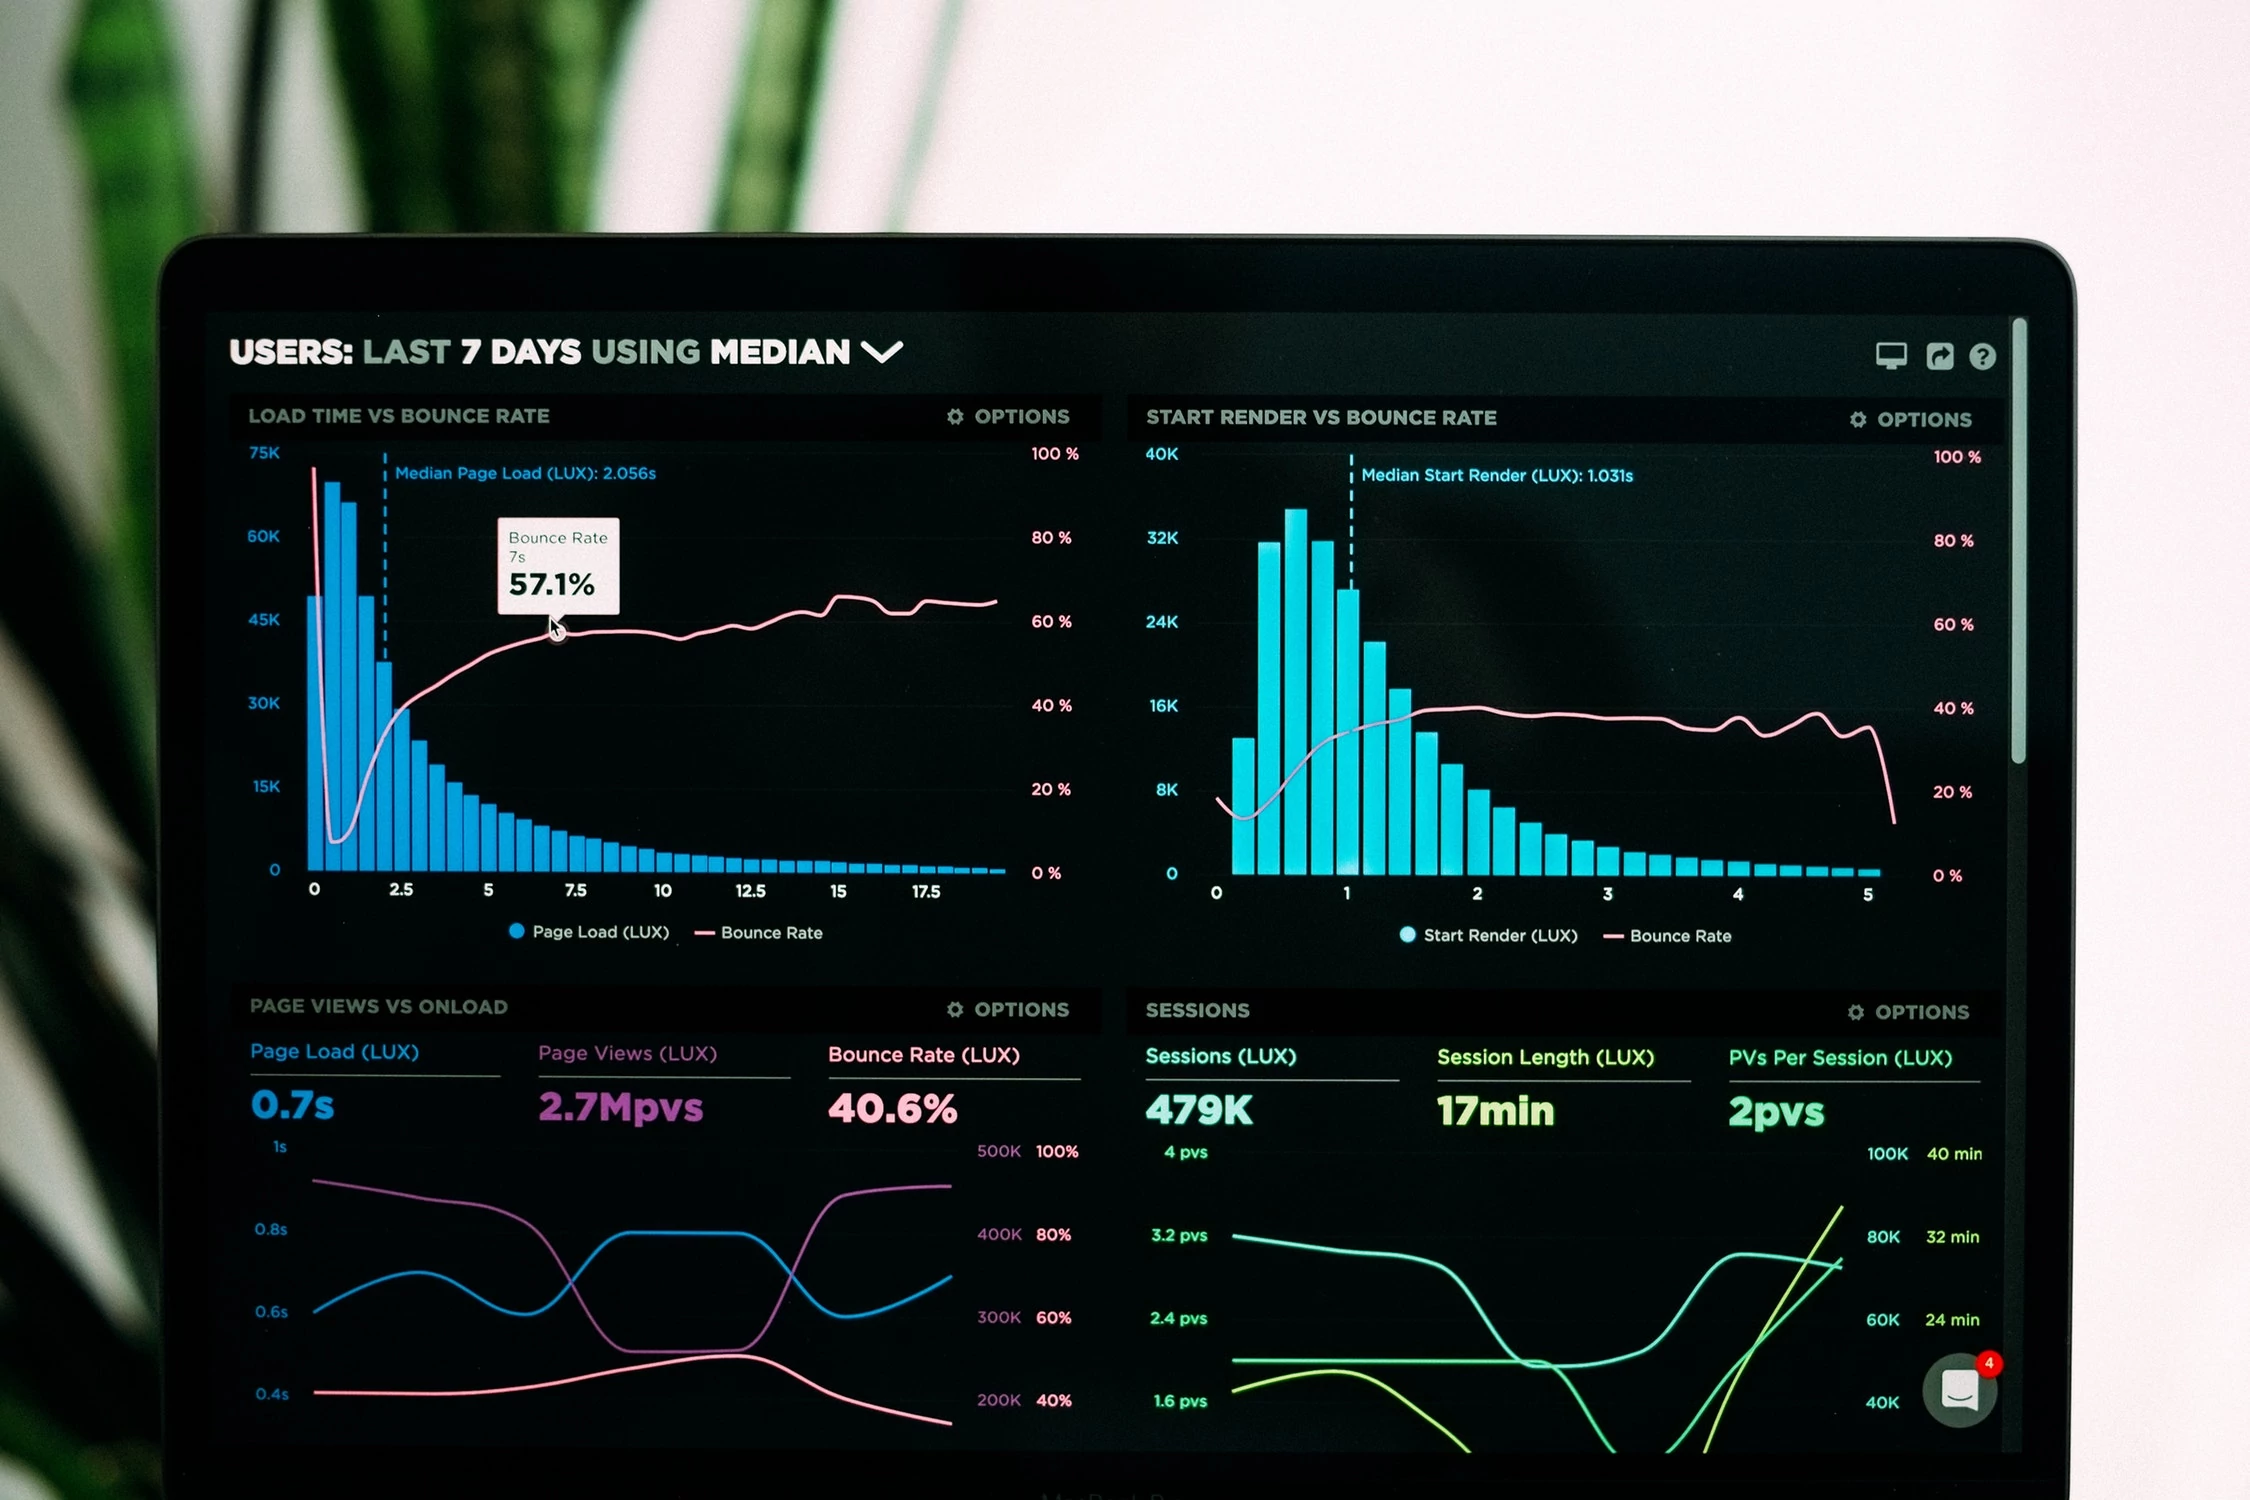 Data visualisation is not a goal, but a tool